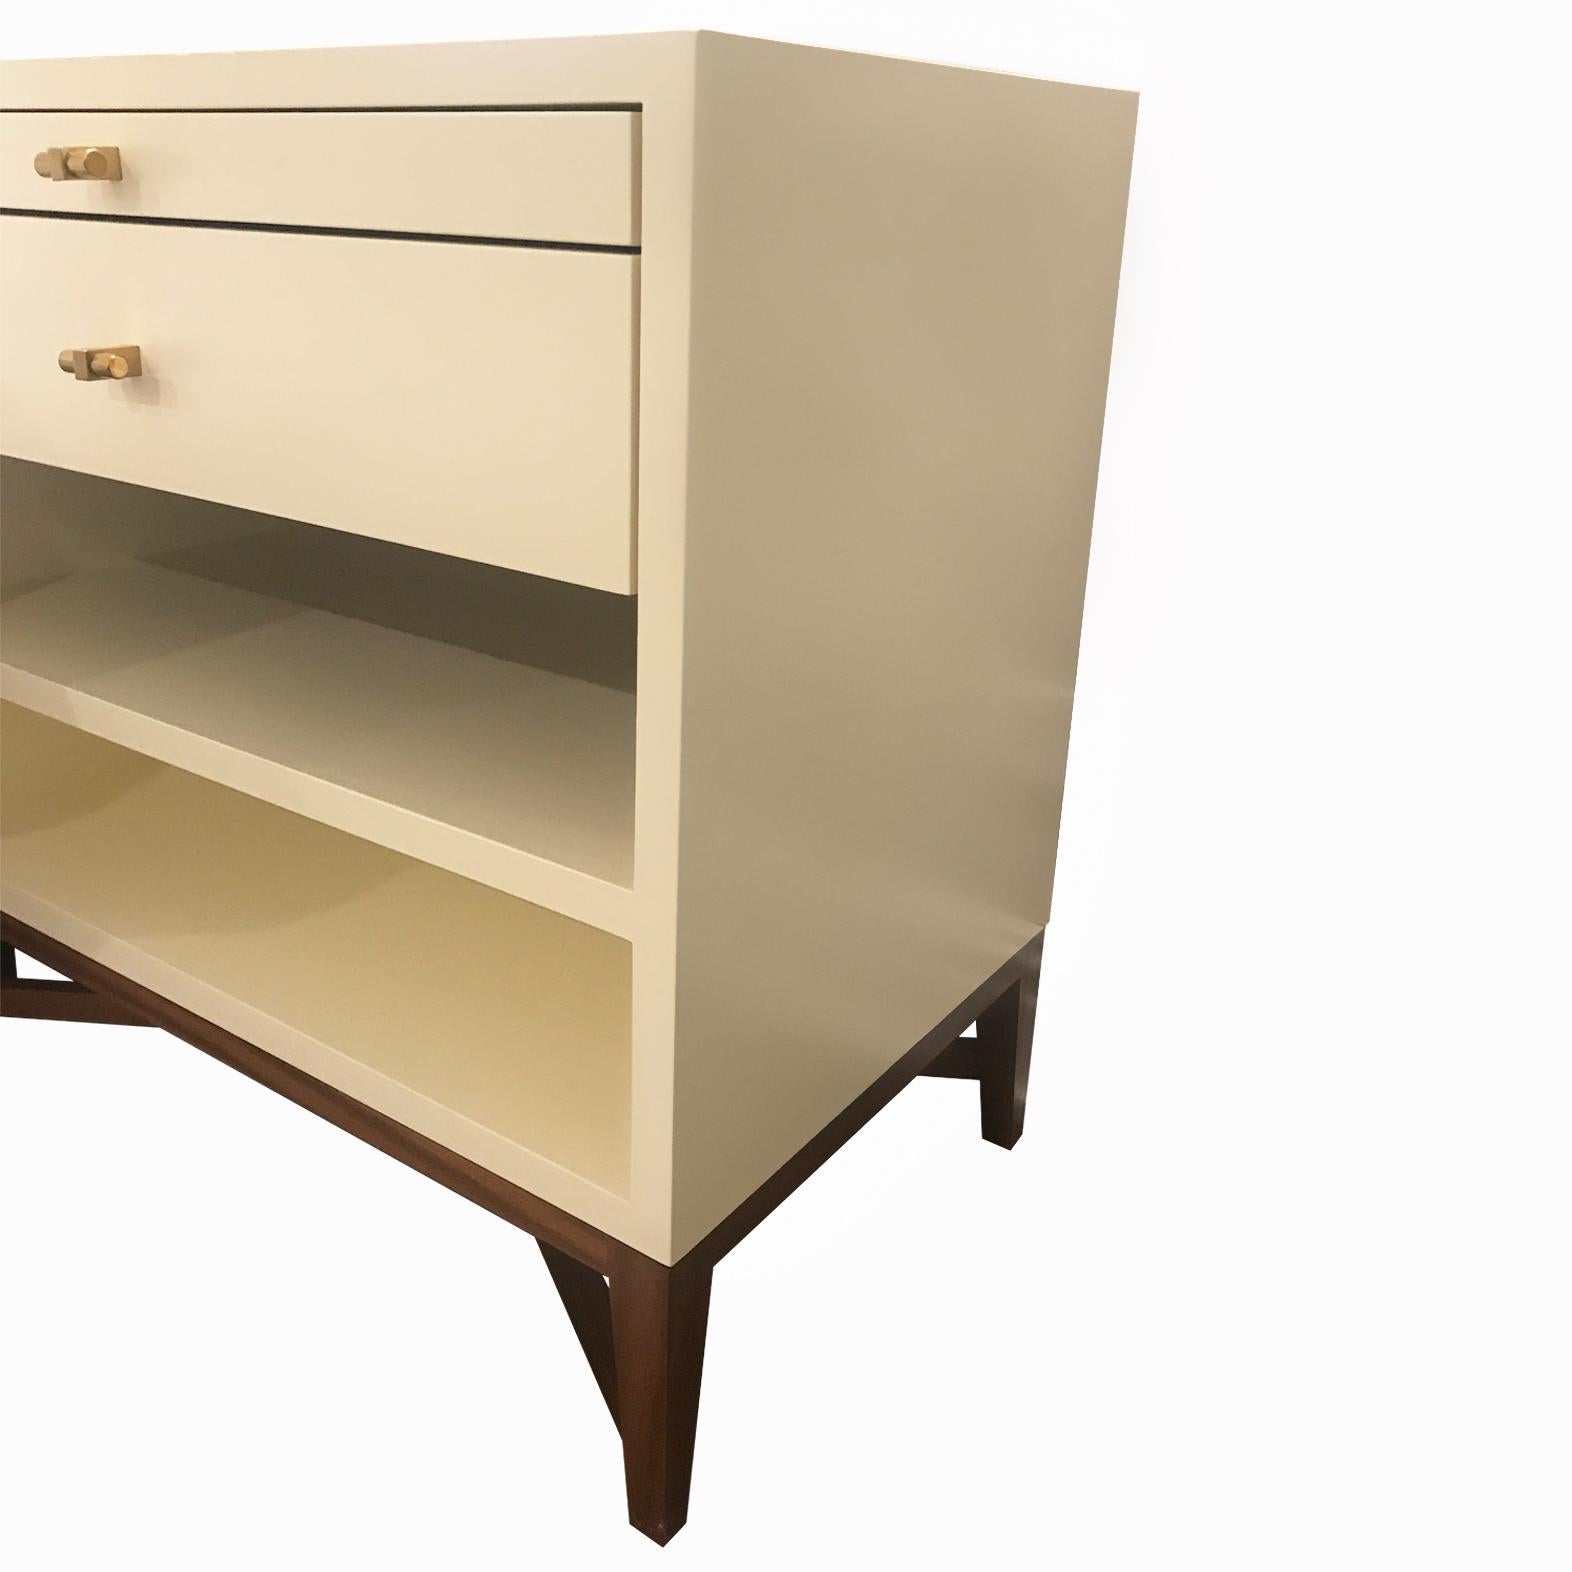 New Production, made to order. Can be any color- red, blue, green, cream etc
Table with pull out tray, one drawer and open shelving. Legs in walnut. Soft close drawer.
Size (any), color (any color-- we match any pantone or BM color) and finish